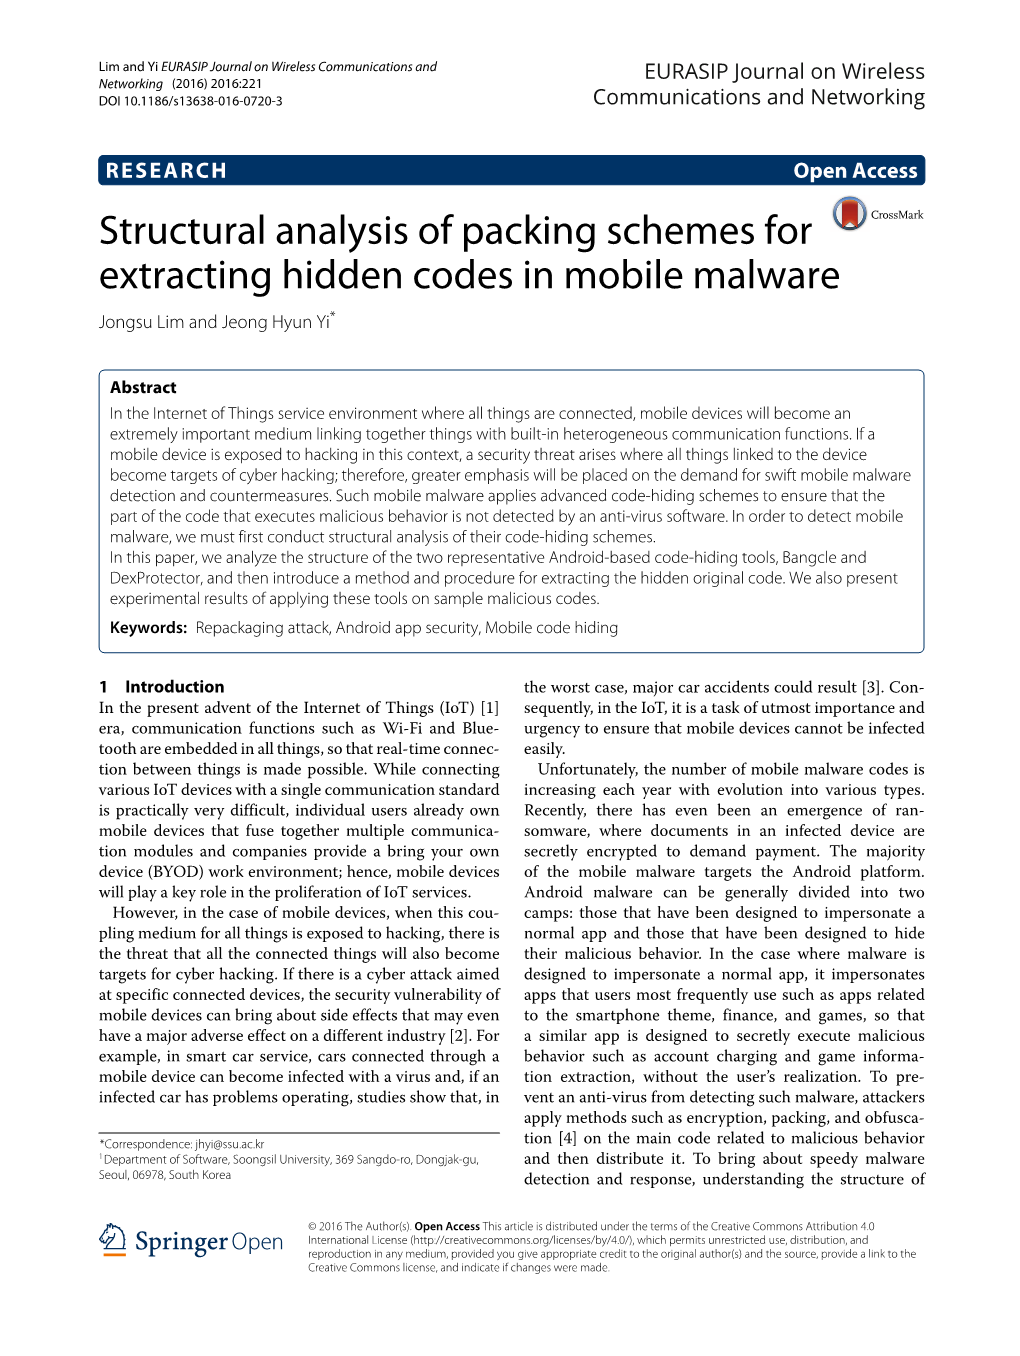 Structural Analysis of Packing Schemes for Extracting Hidden Codes in Mobile Malware Jongsu Lim and Jeong Hyun Yi*